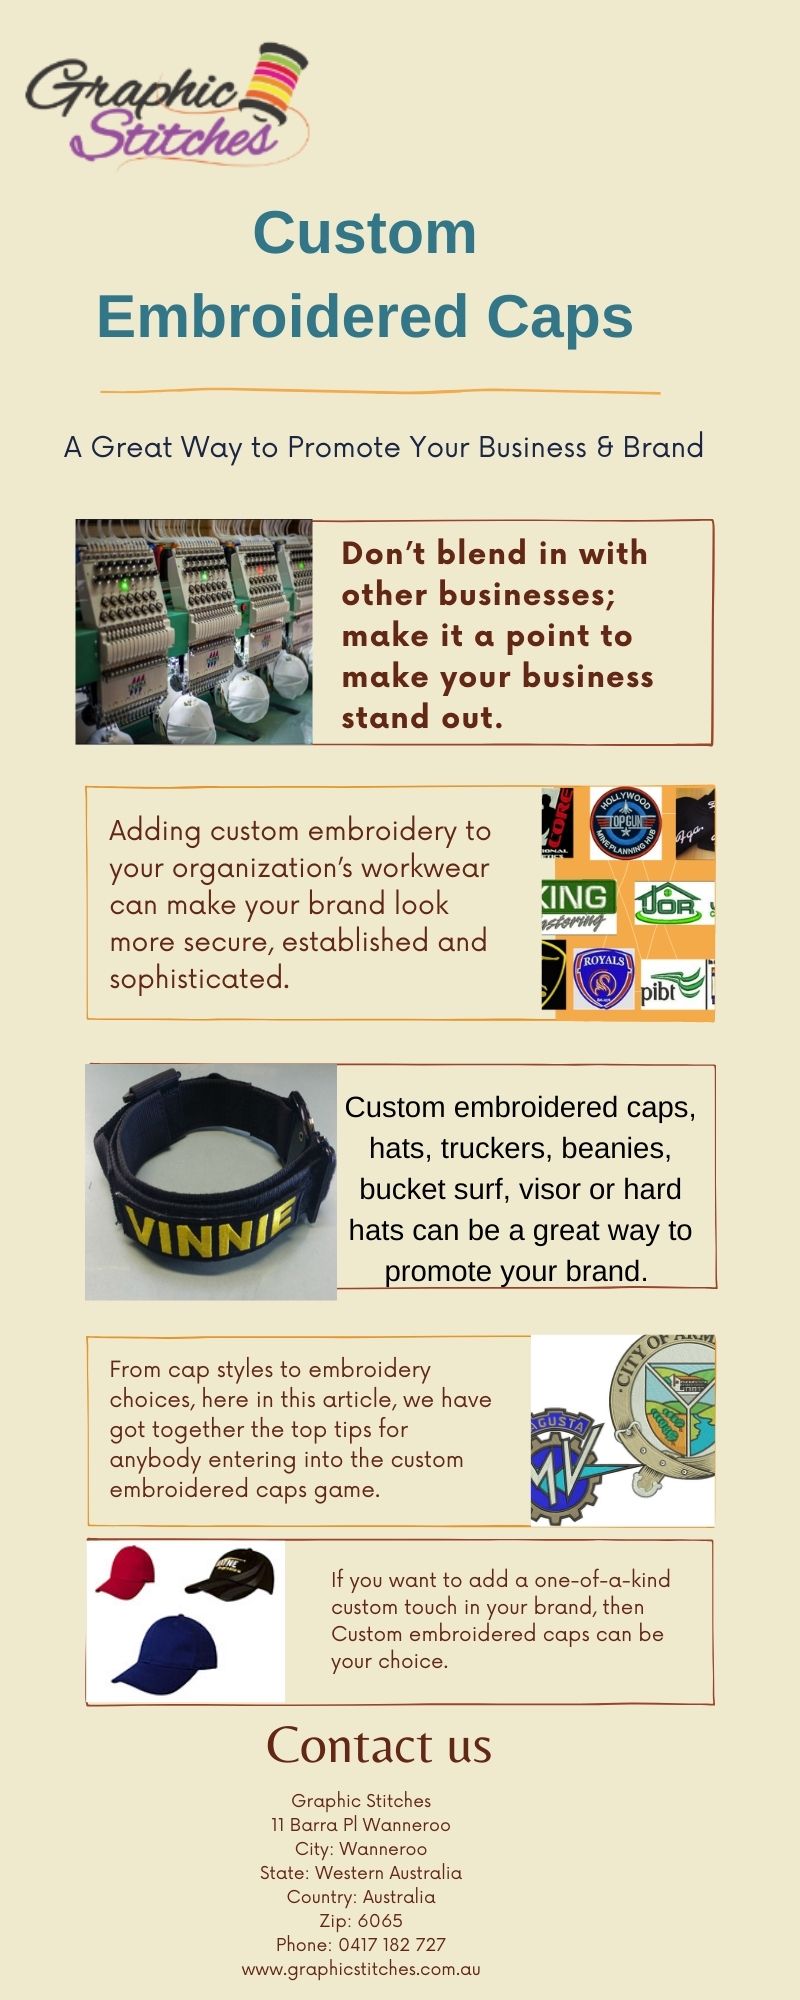 Custom Embroidered Caps A Great Way to Promote Your Business &Brand.jpg Please visit: https://topsitenet.com/article/627670-custom-embroidered-caps-a-great-way-to-promote-your-business-brand-/
 by Graphicstitch